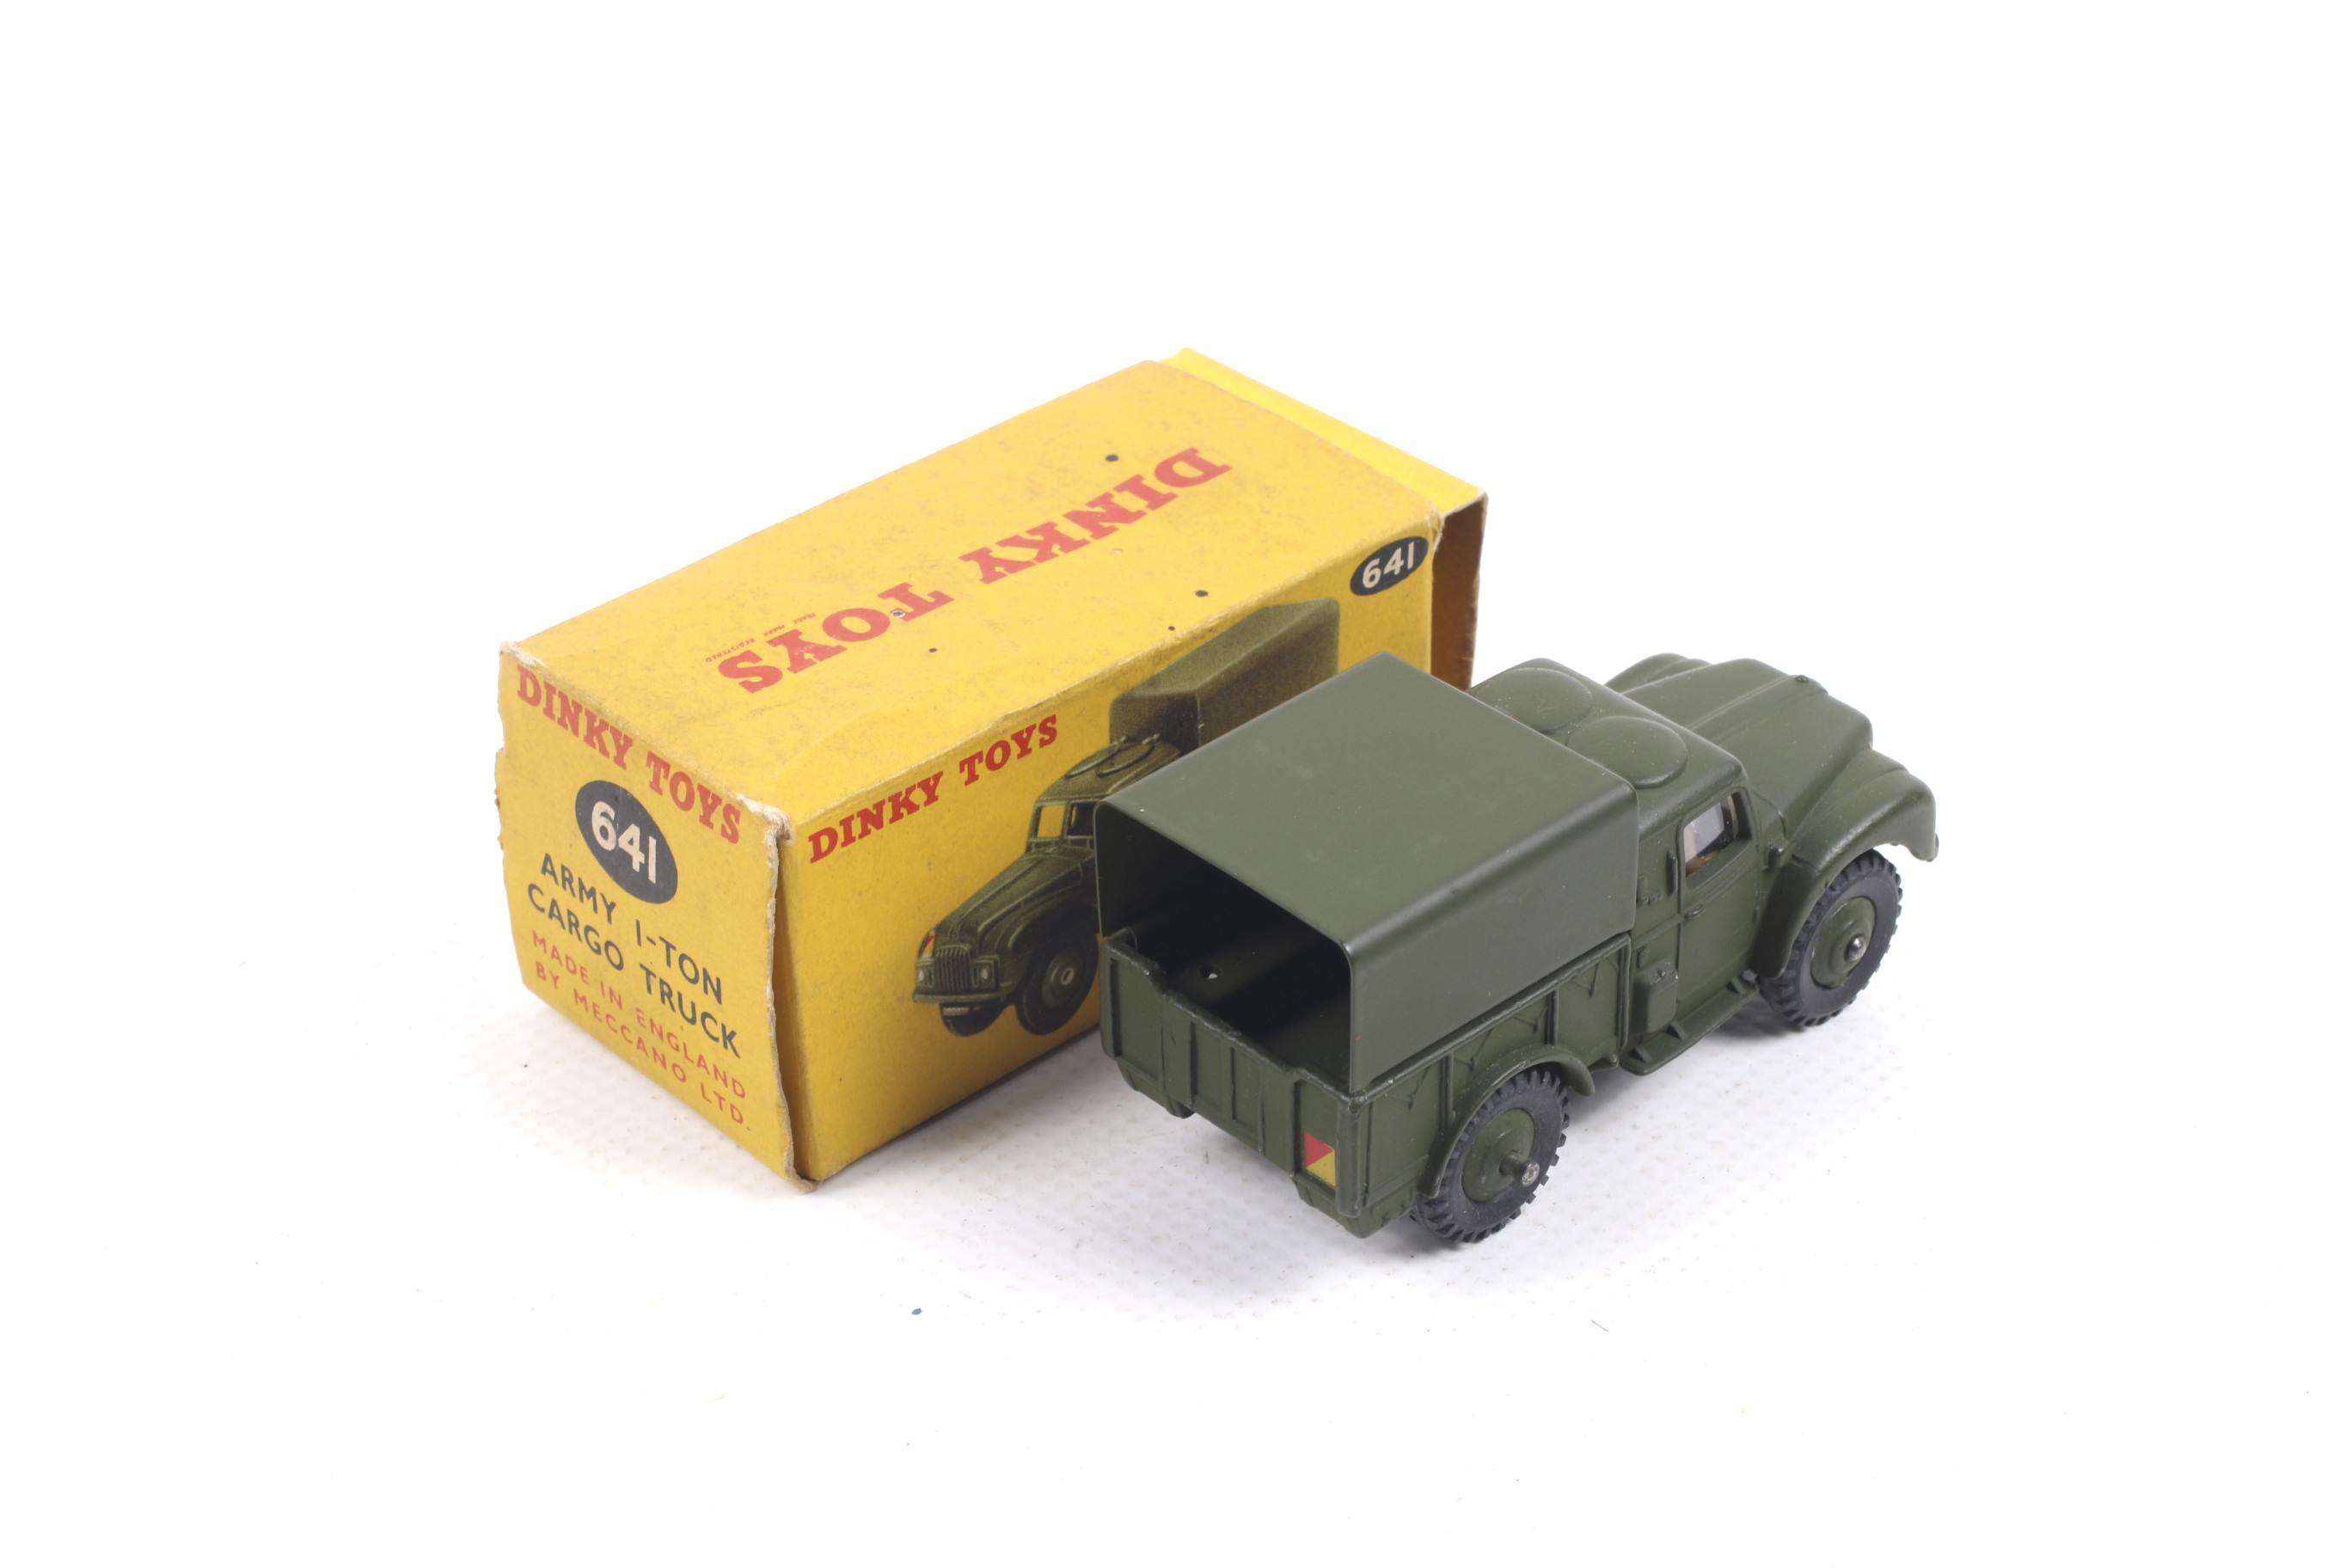 A Dinky diecast army 1 ton cargo truck. No. 641, with green body and black wheels, in original box. - Image 2 of 2